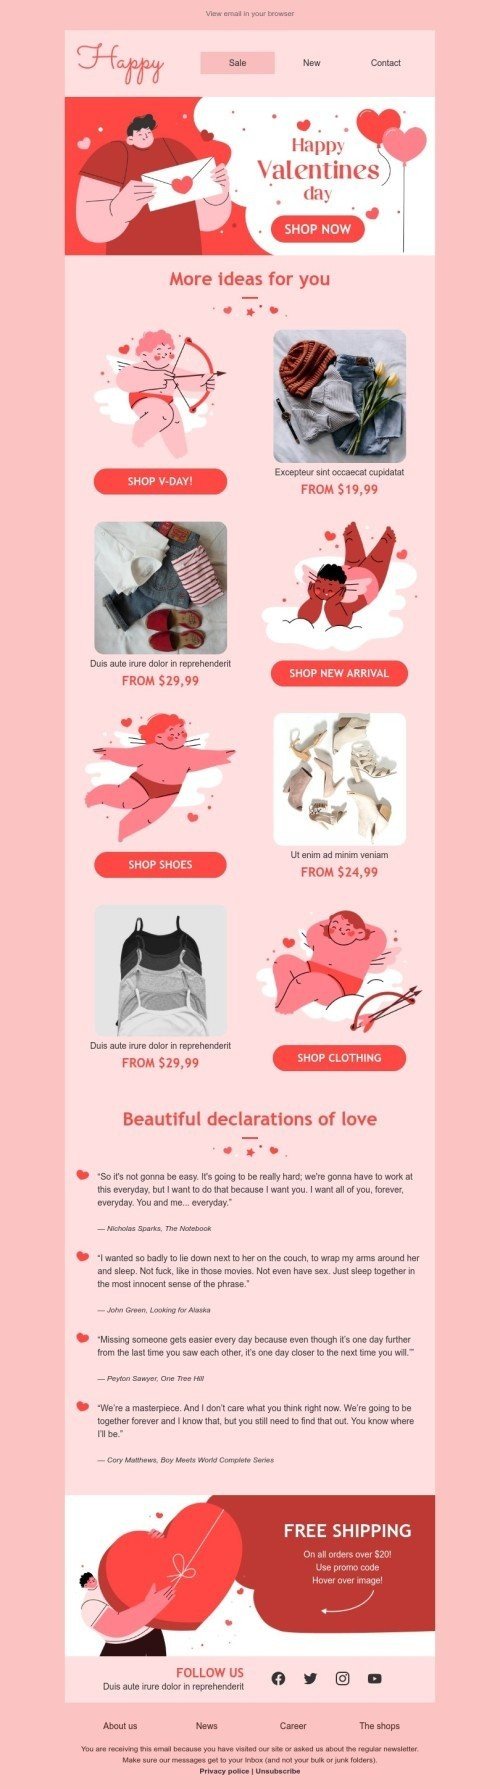 Valentine’s Day Email Template "Huge Valentine" for Fashion industry desktop view